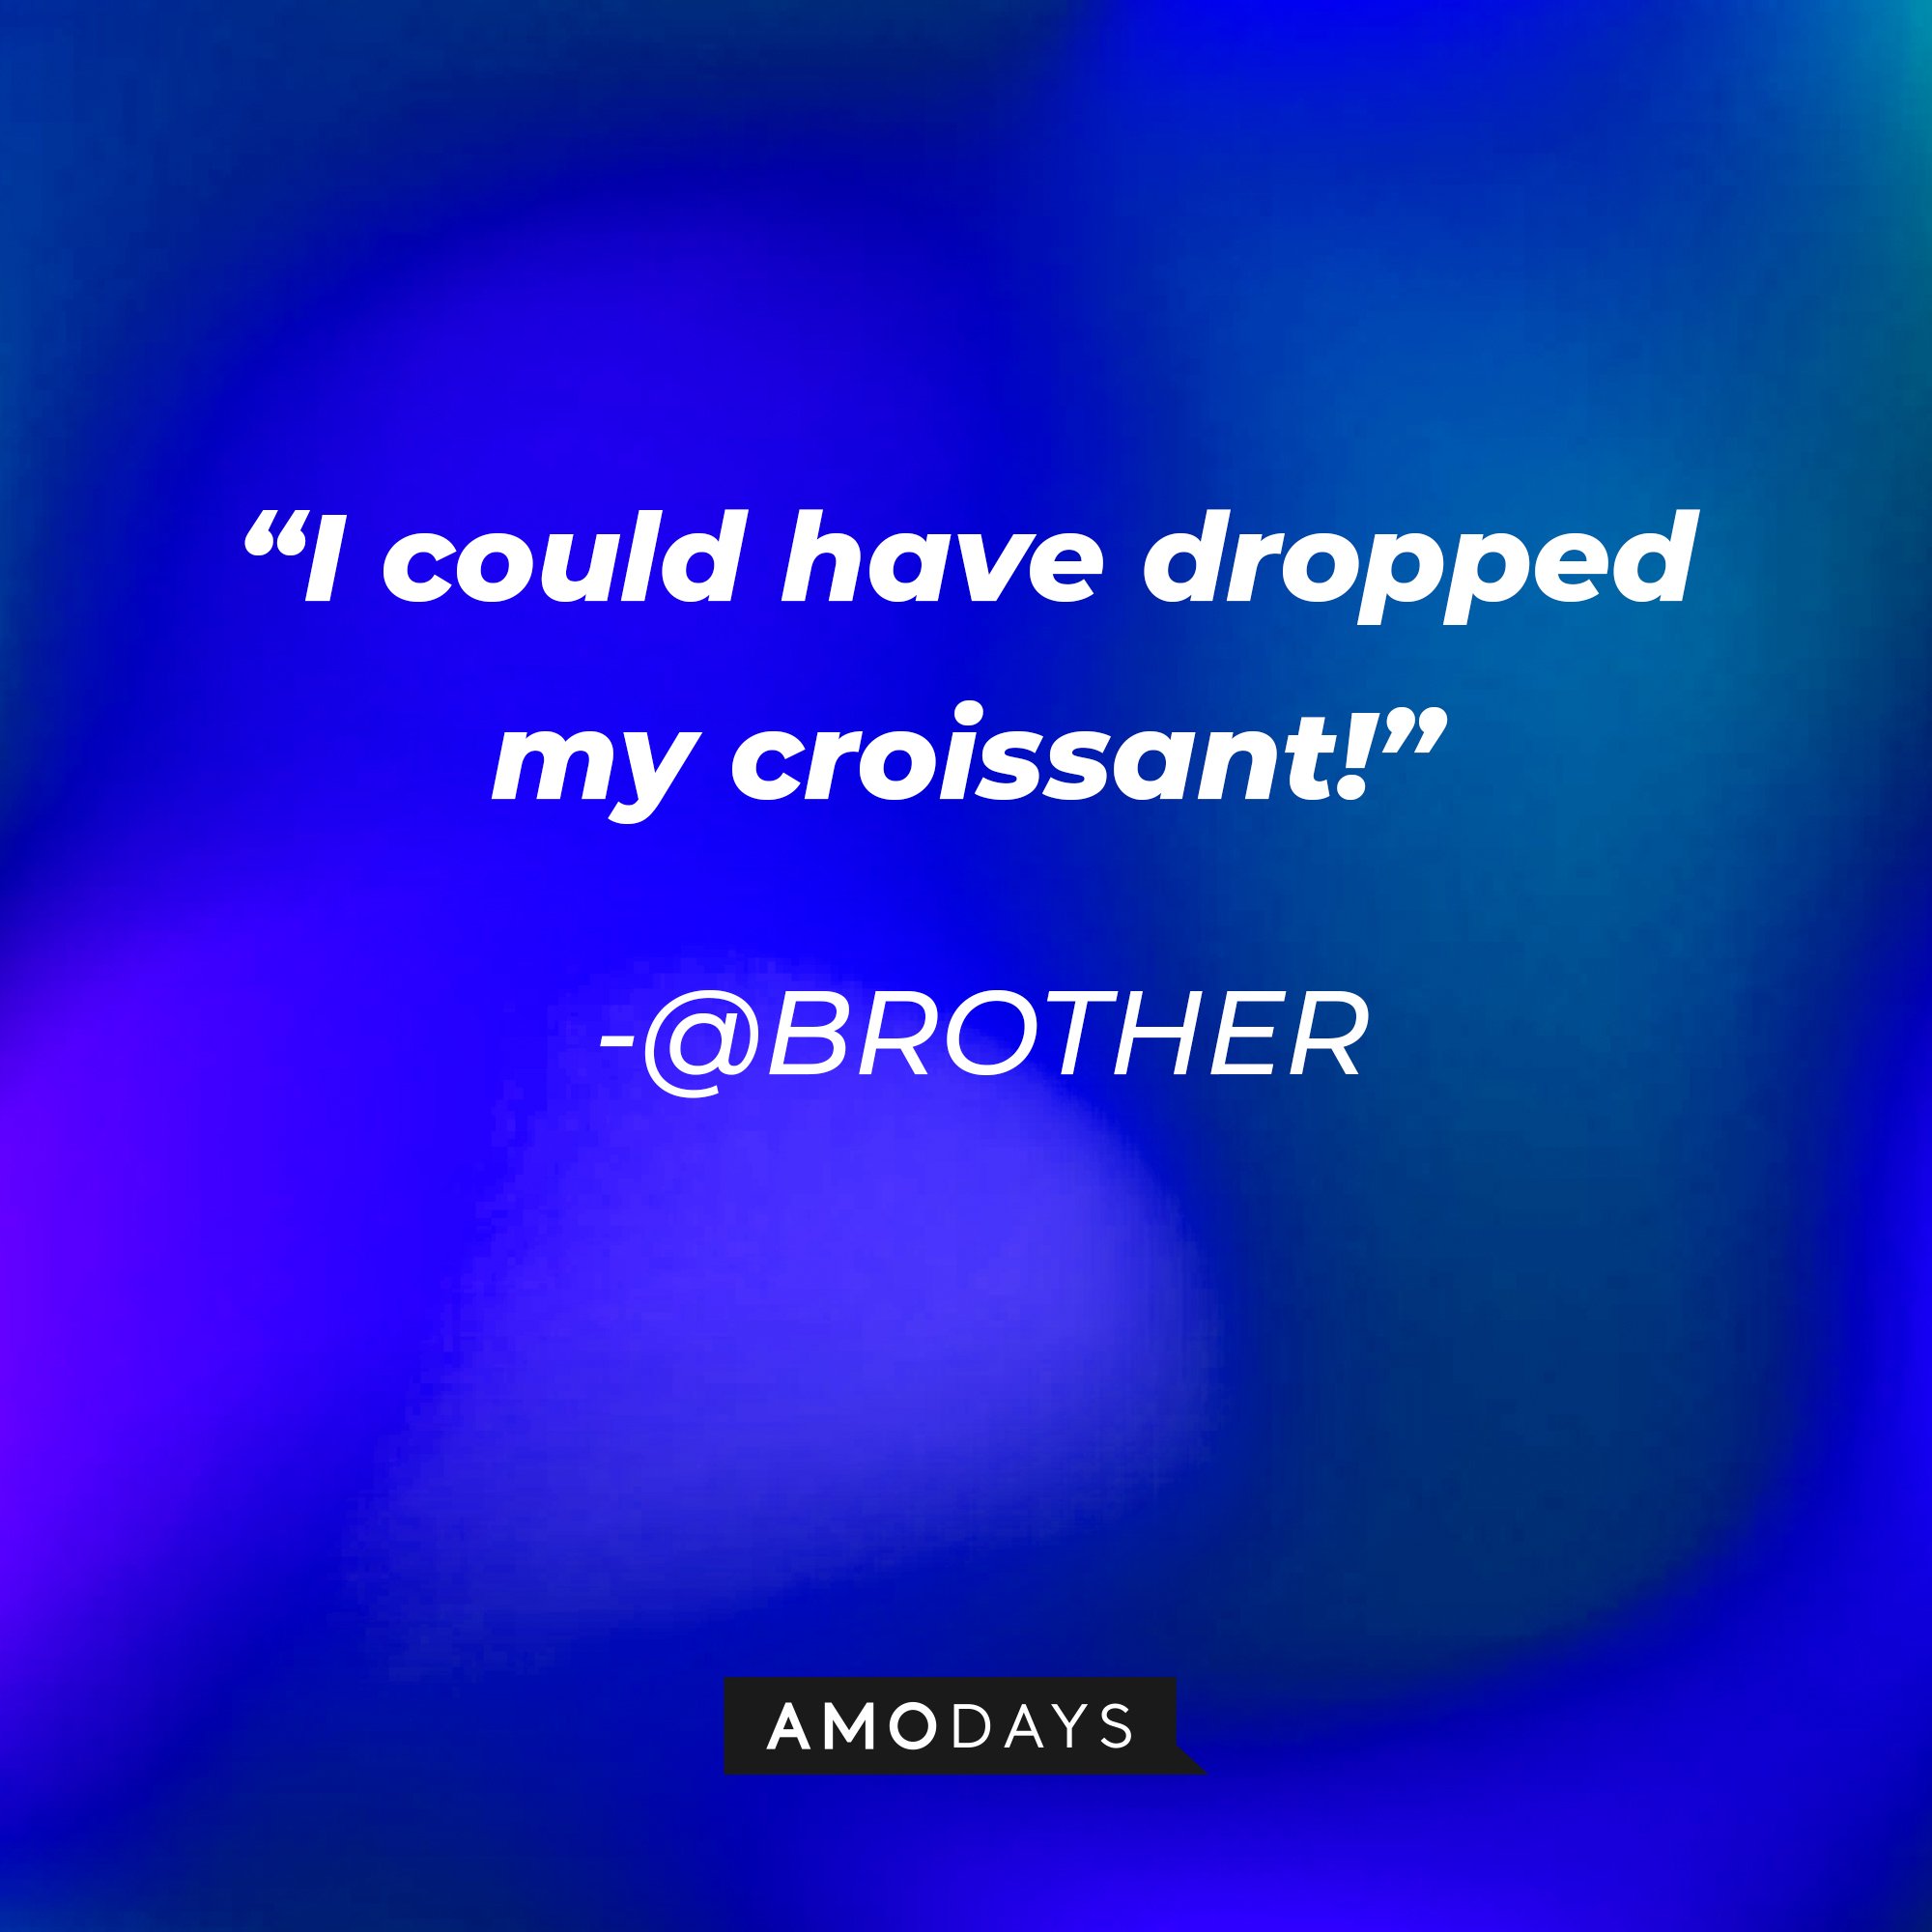  @BROTHER's quote: “I could have dropped my croissant!” | Image: AmoDays